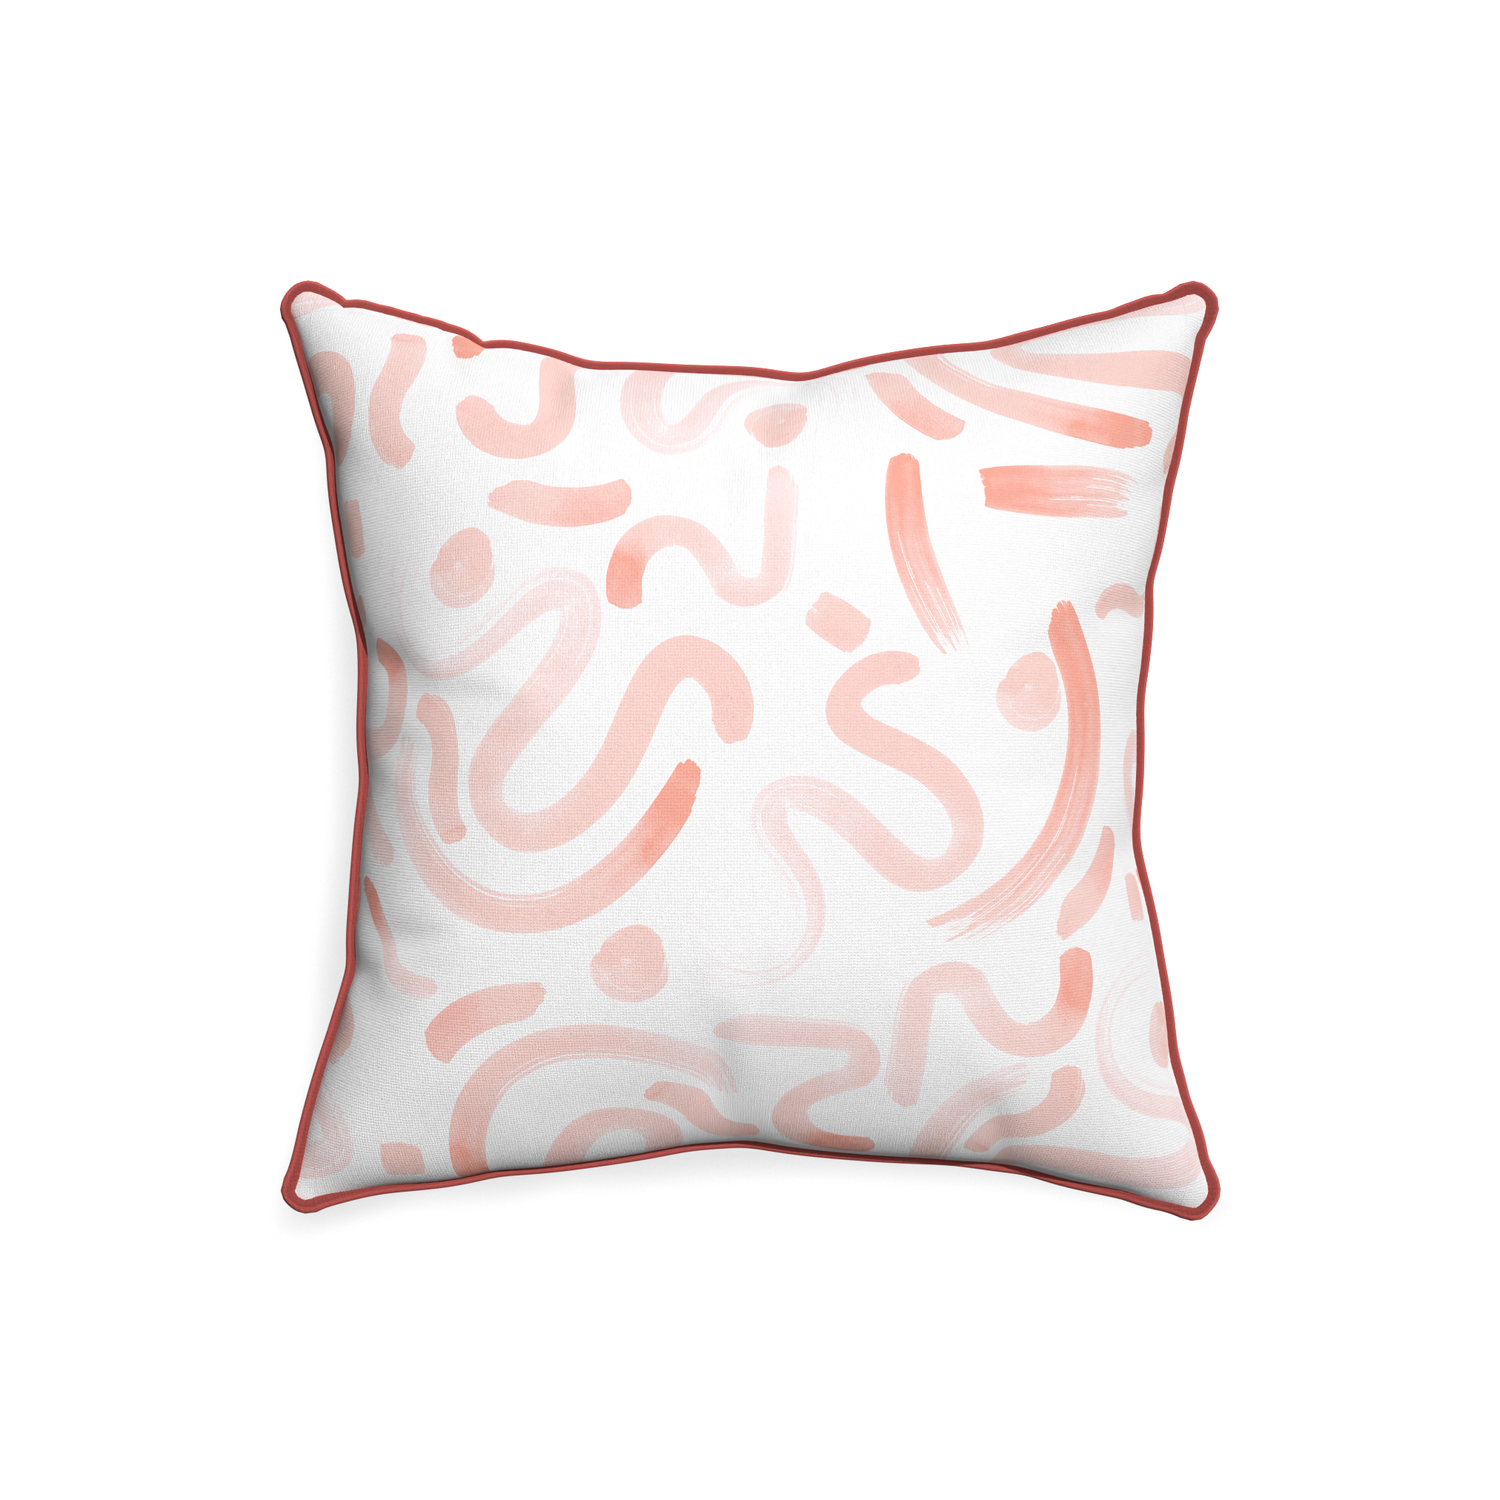 20-square hockney pink custom pillow with c piping on white background